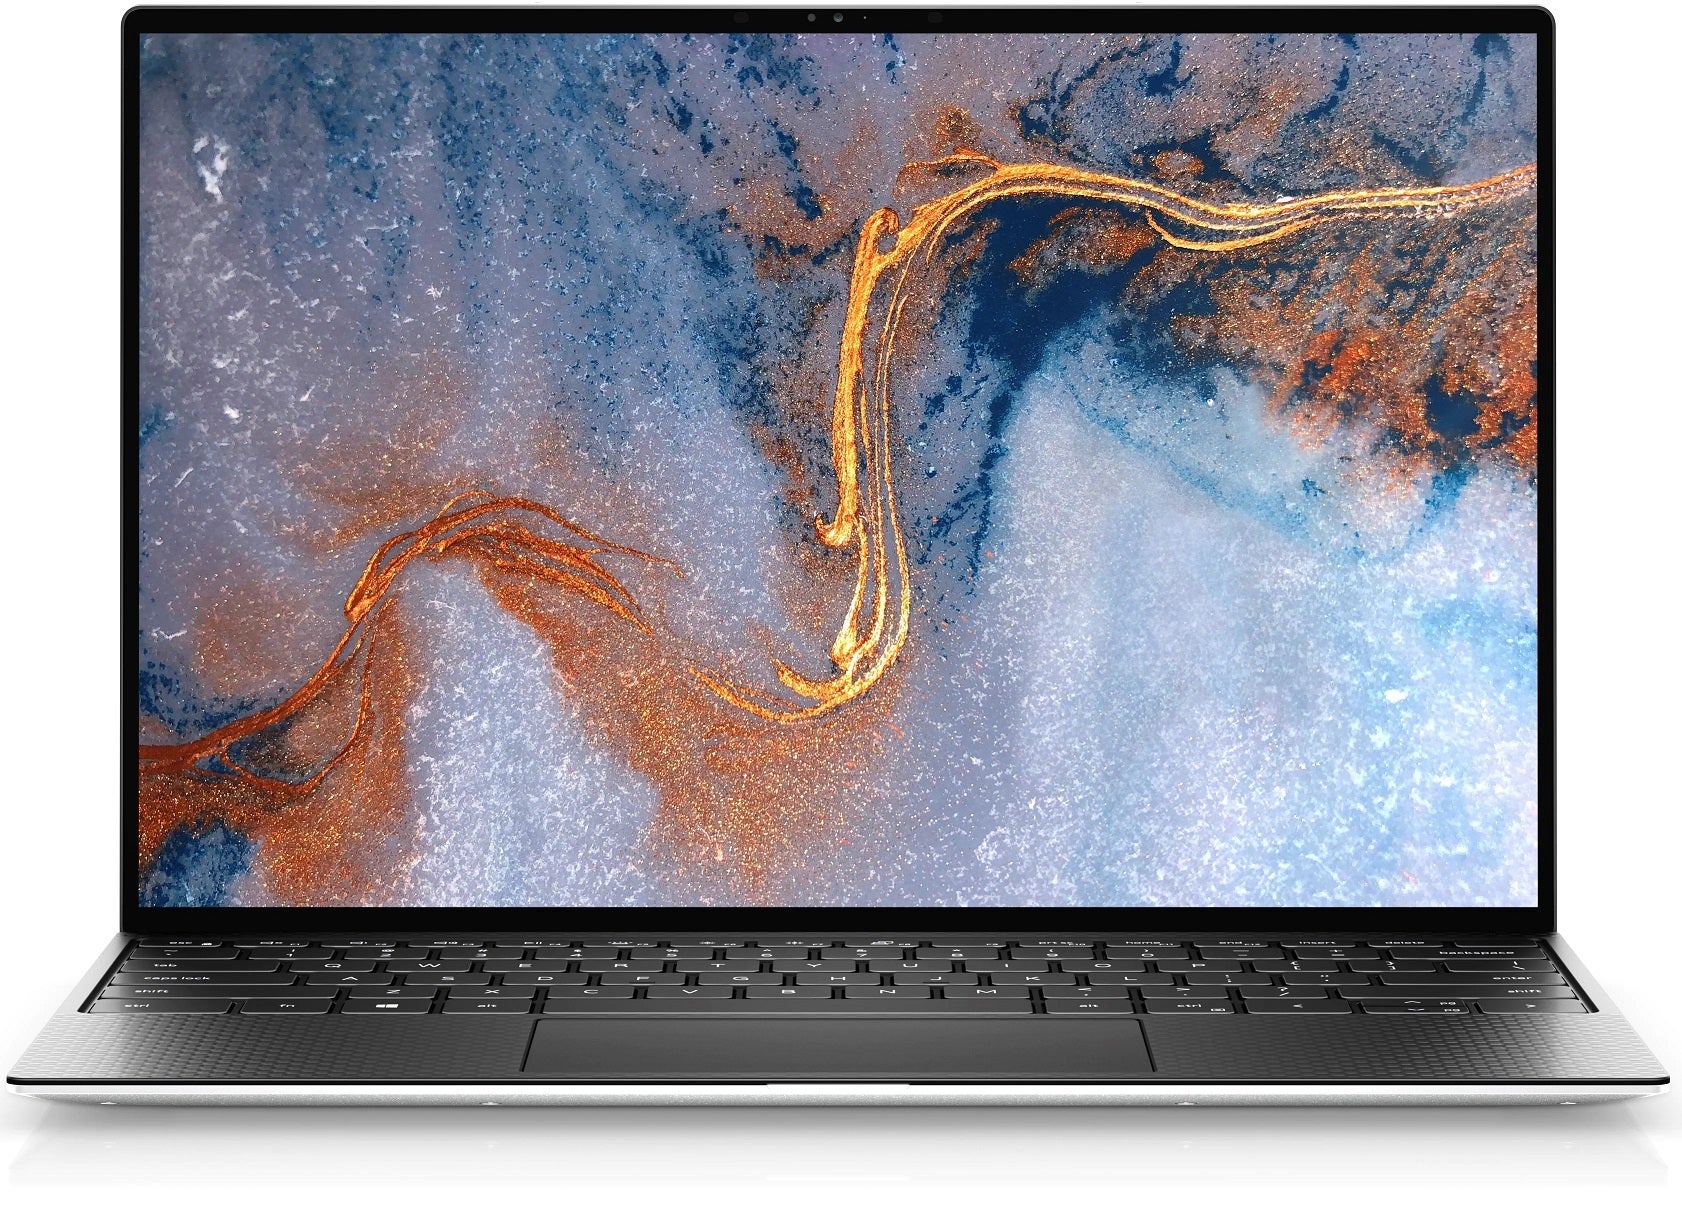 Laptops like the Dell XPS 13 don't need a notch to fit a webcam and other sensors in a thin top bezel - Apple, I never got used to the iPhone notch, now it's on MacBooks too?